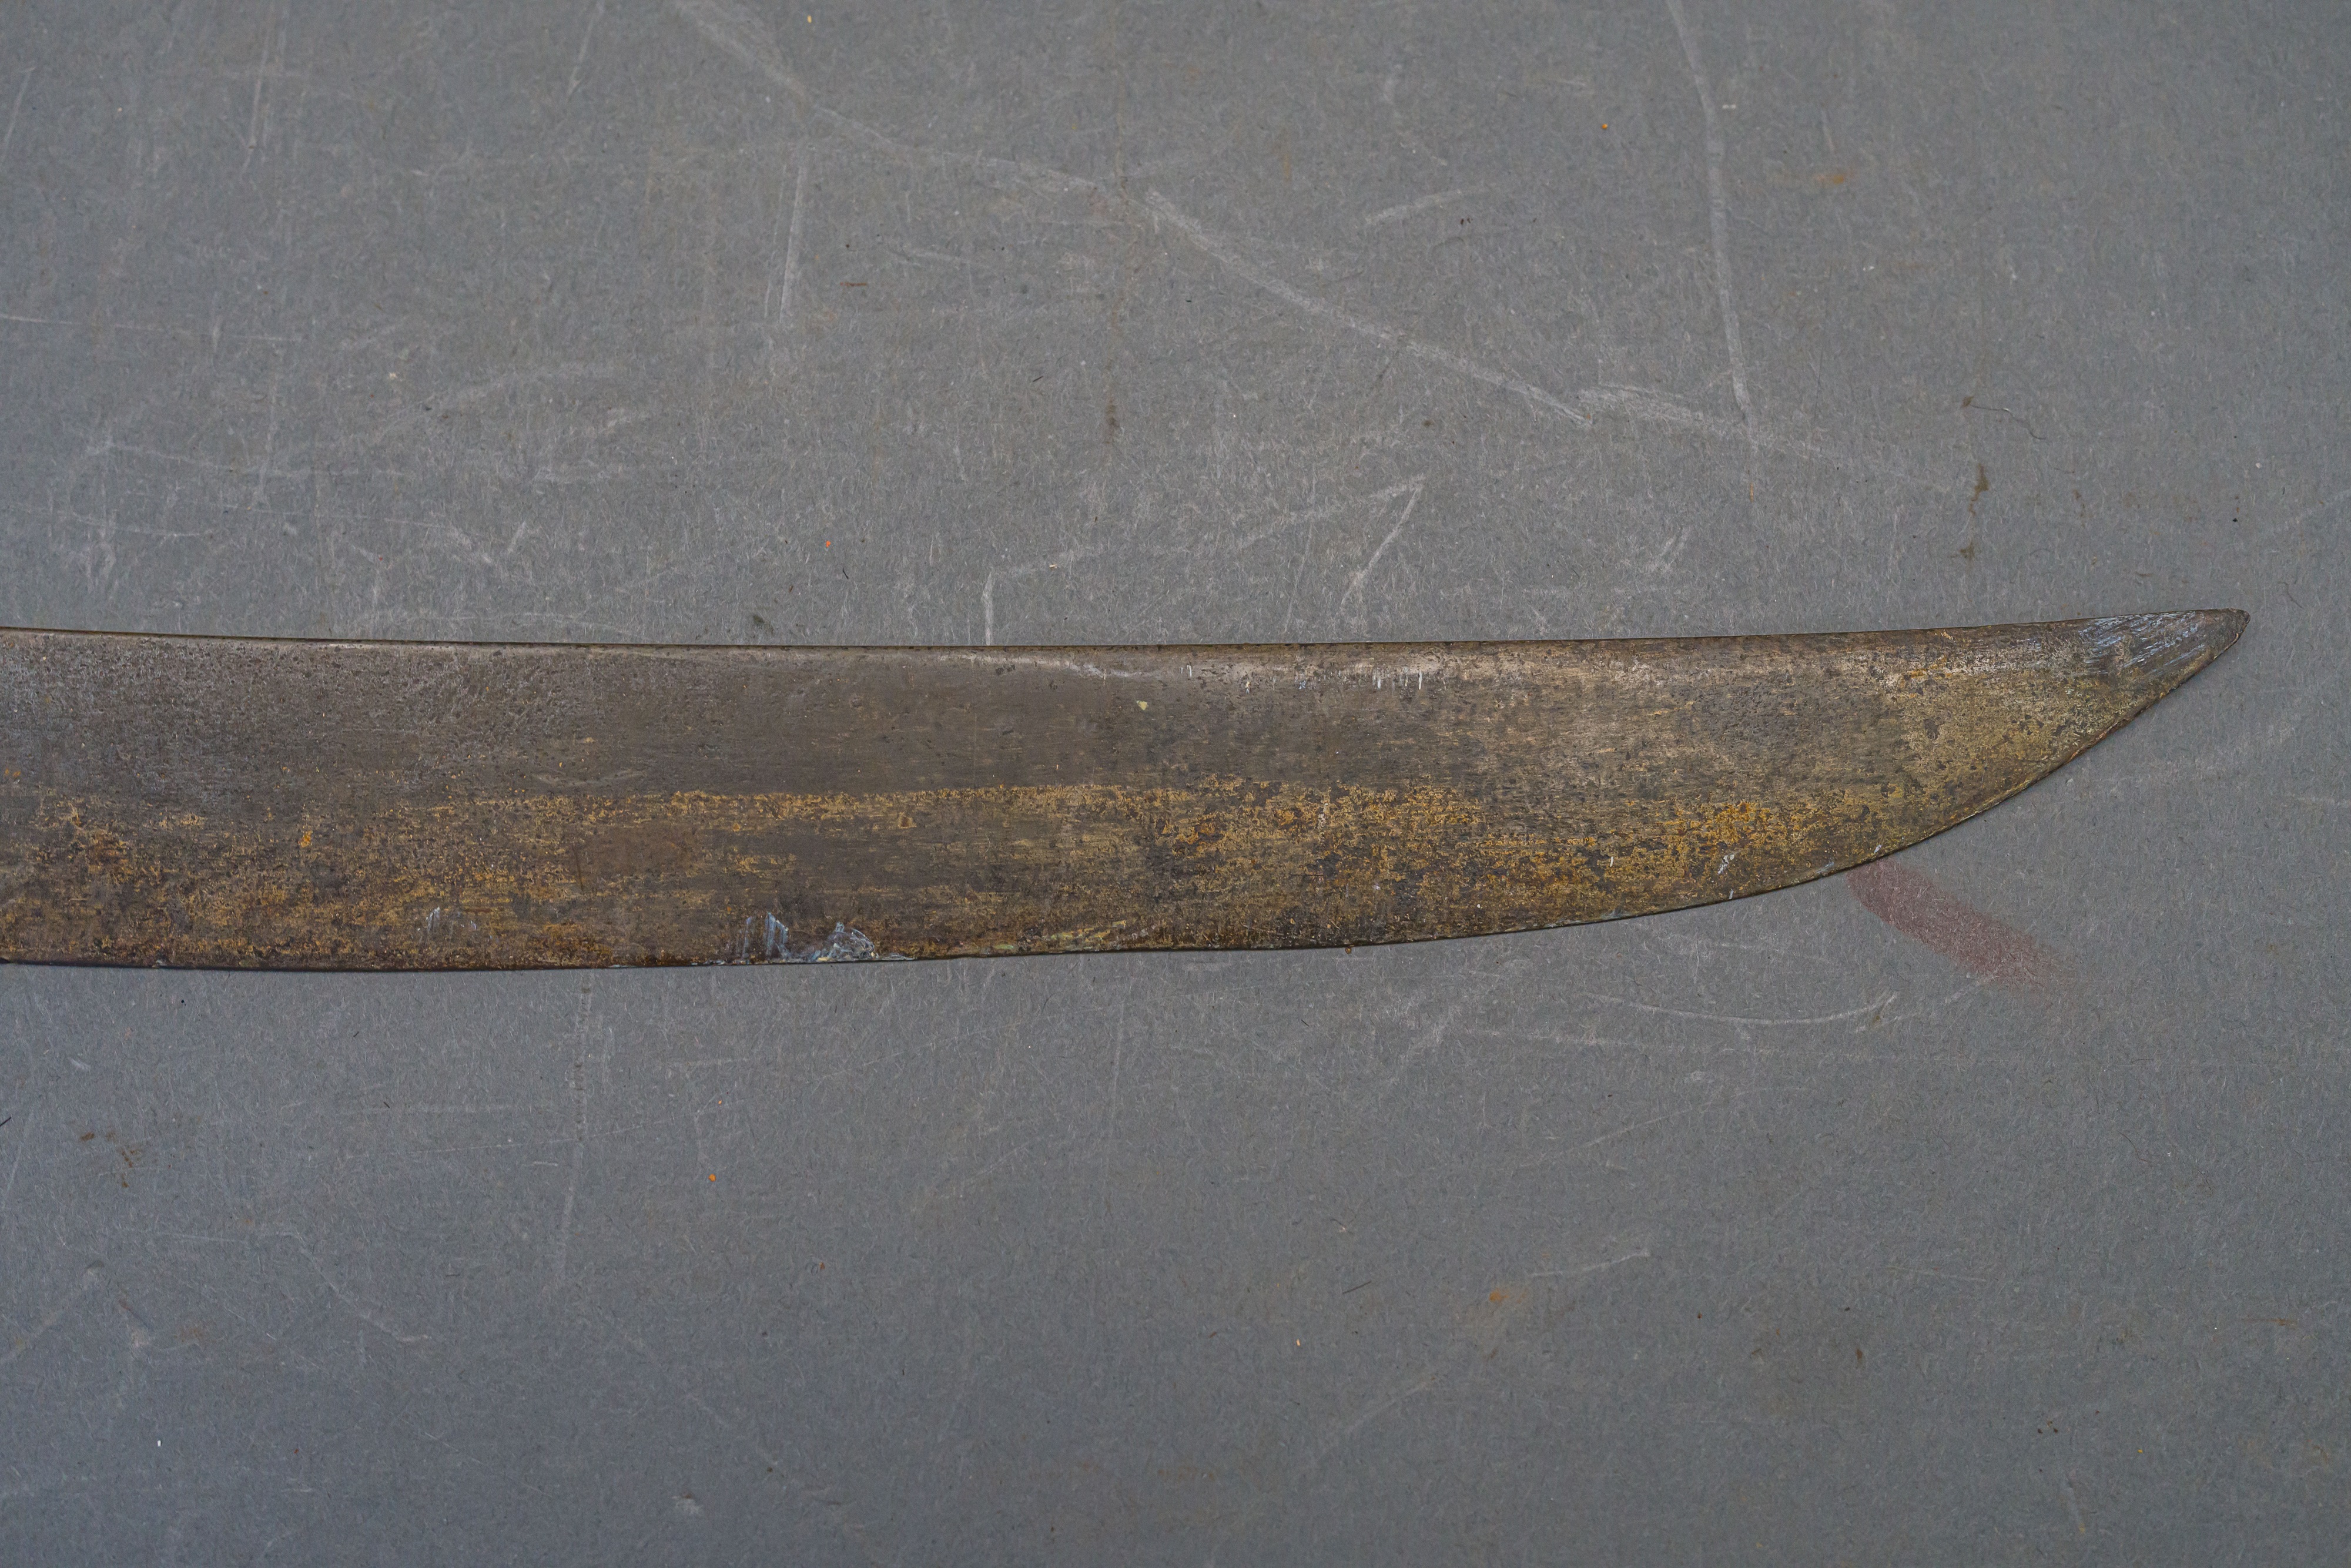 TWO AFRICAN AXES, A BOOMERANG AND A FRENCH MODEL 1816 INFANTRY SHORTSWORD (BRIQUET) - Image 5 of 23